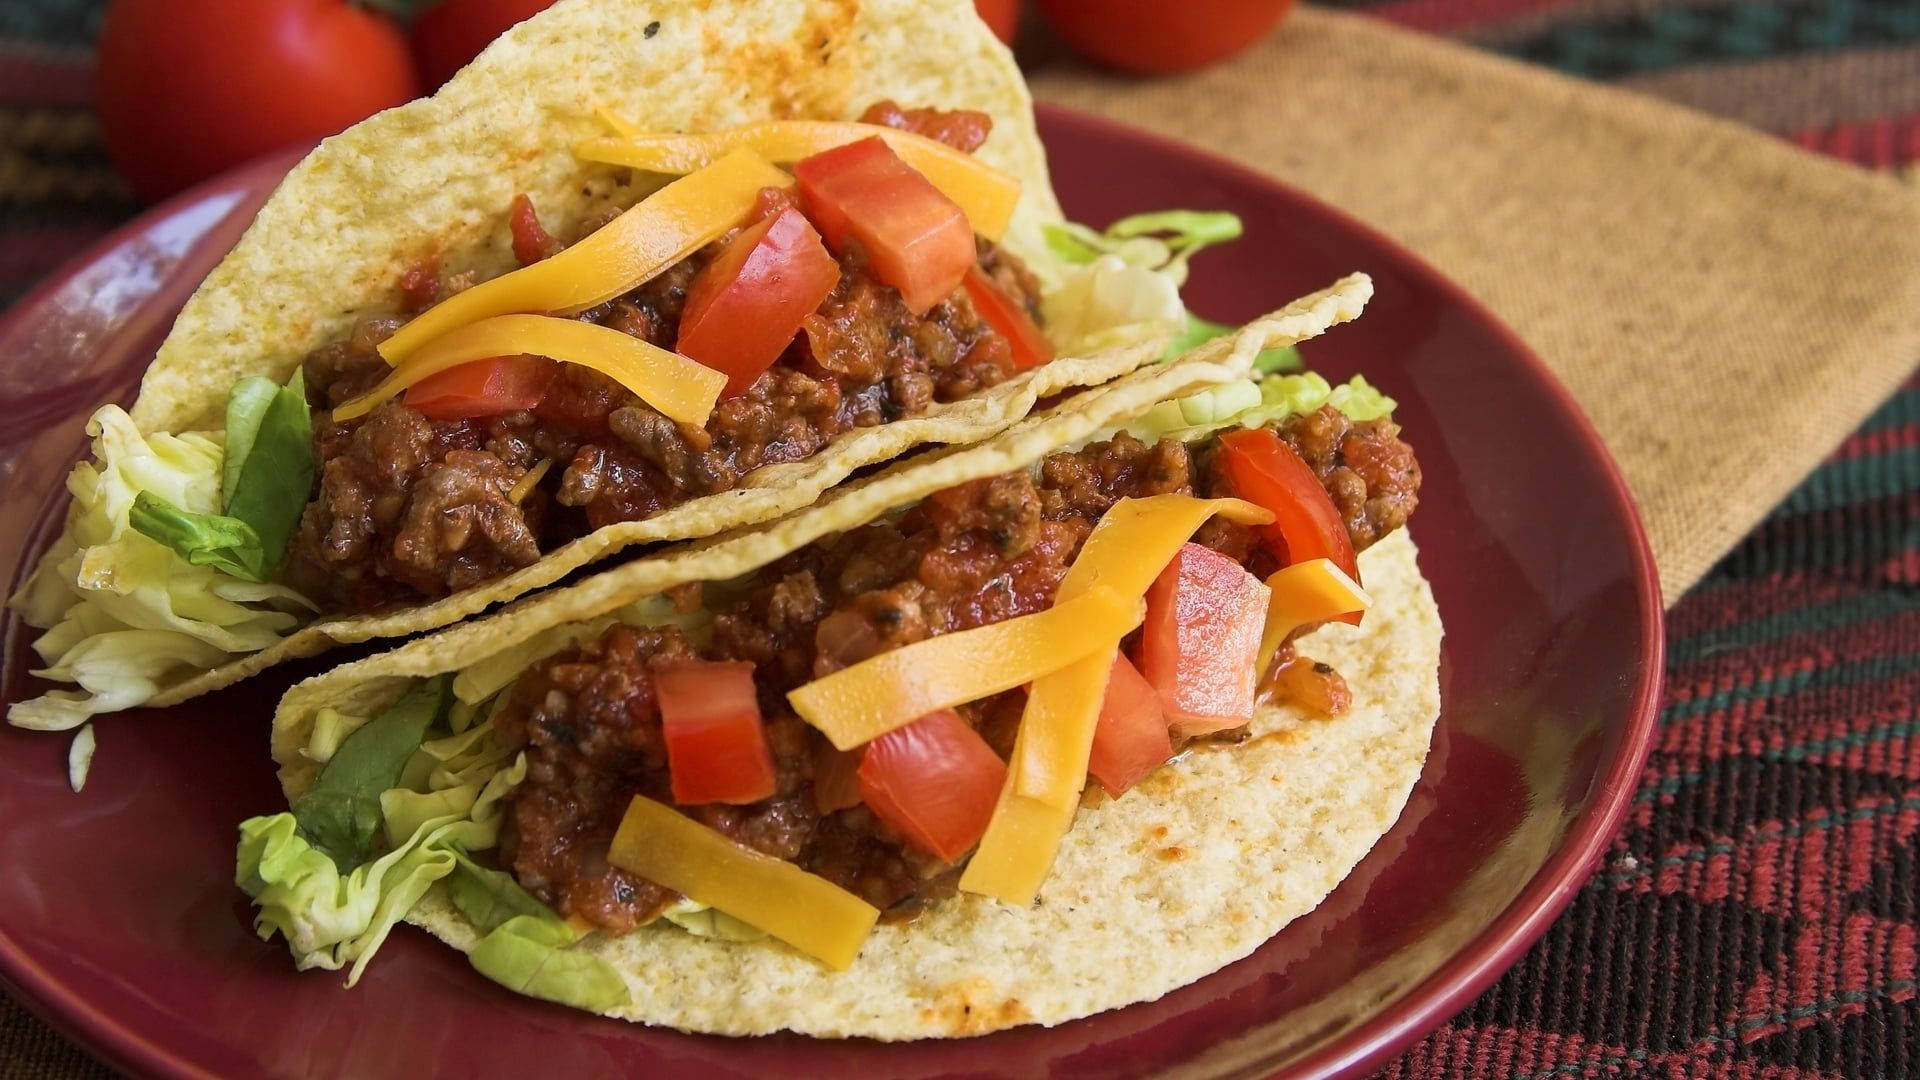 Authentic Flavors - Gourmet Tacos On A Plate Background